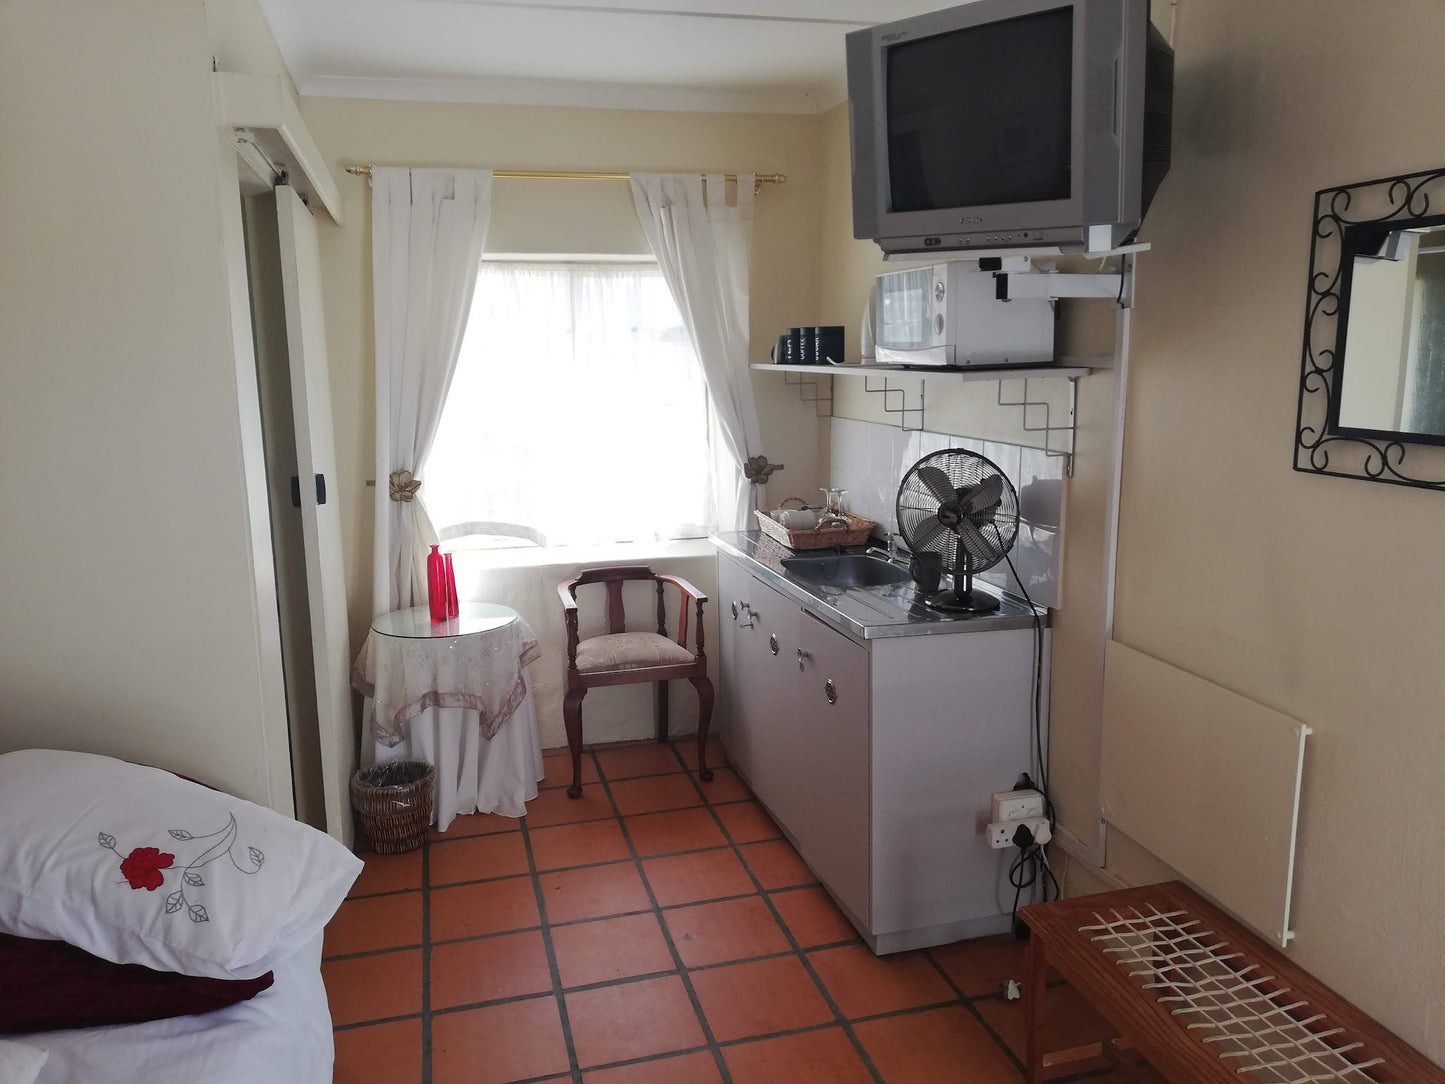 Uitvlugt Guest House Worcester Western Cape South Africa 